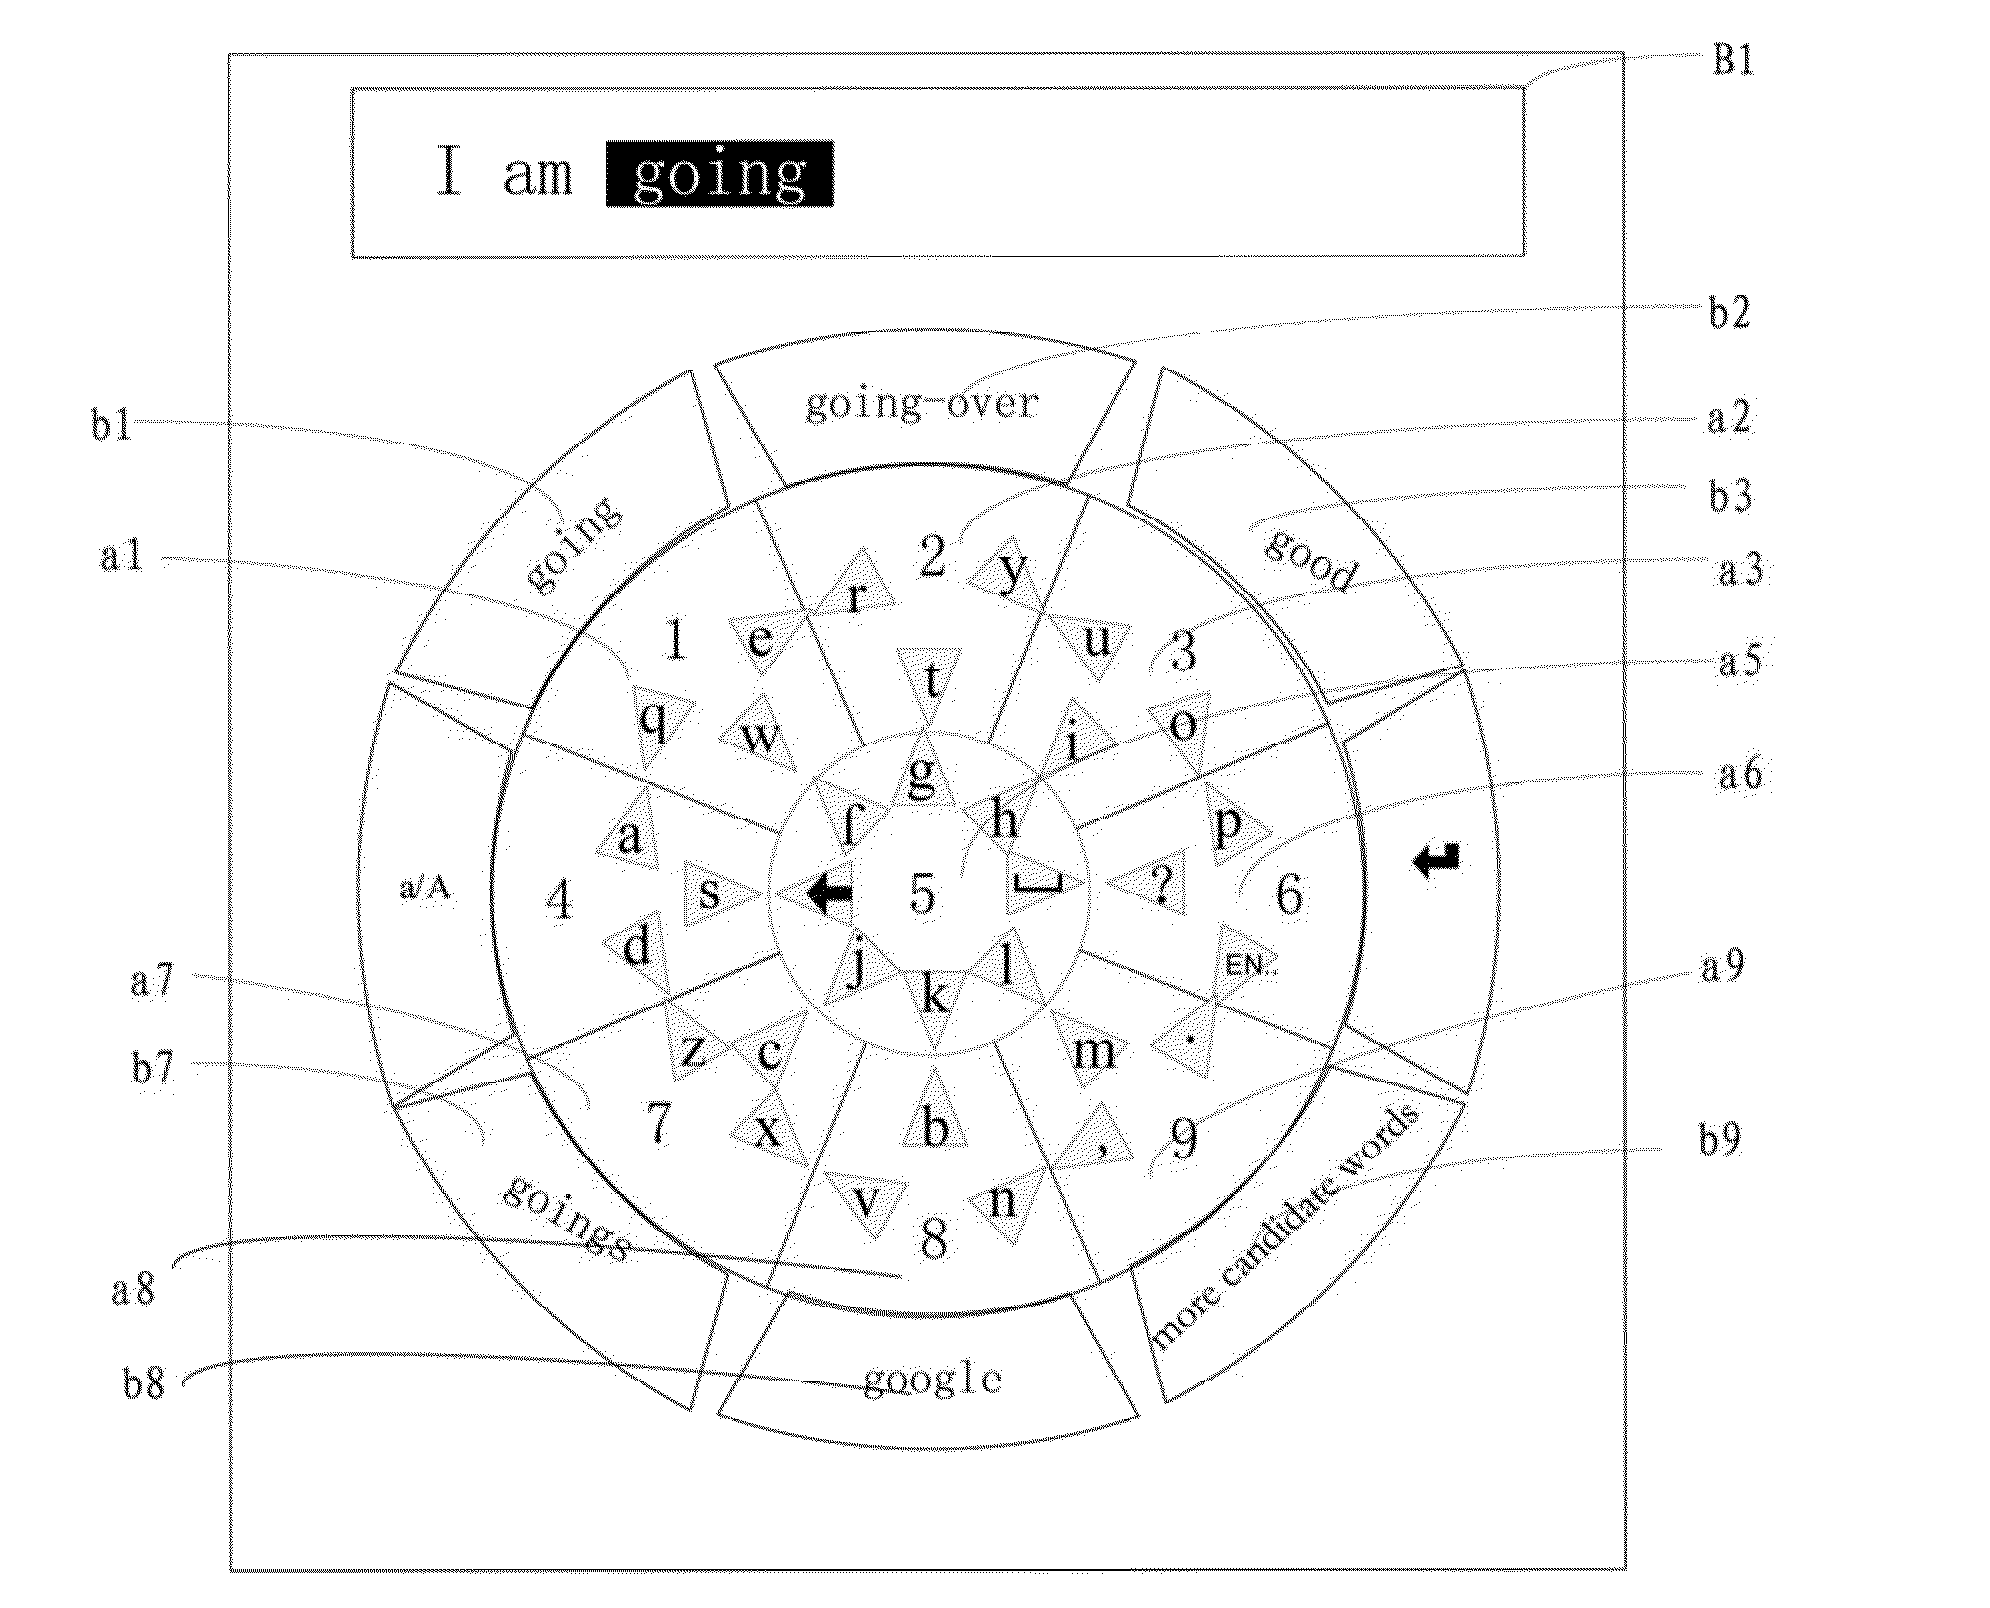 Input method and apparatus of circular touch keyboard